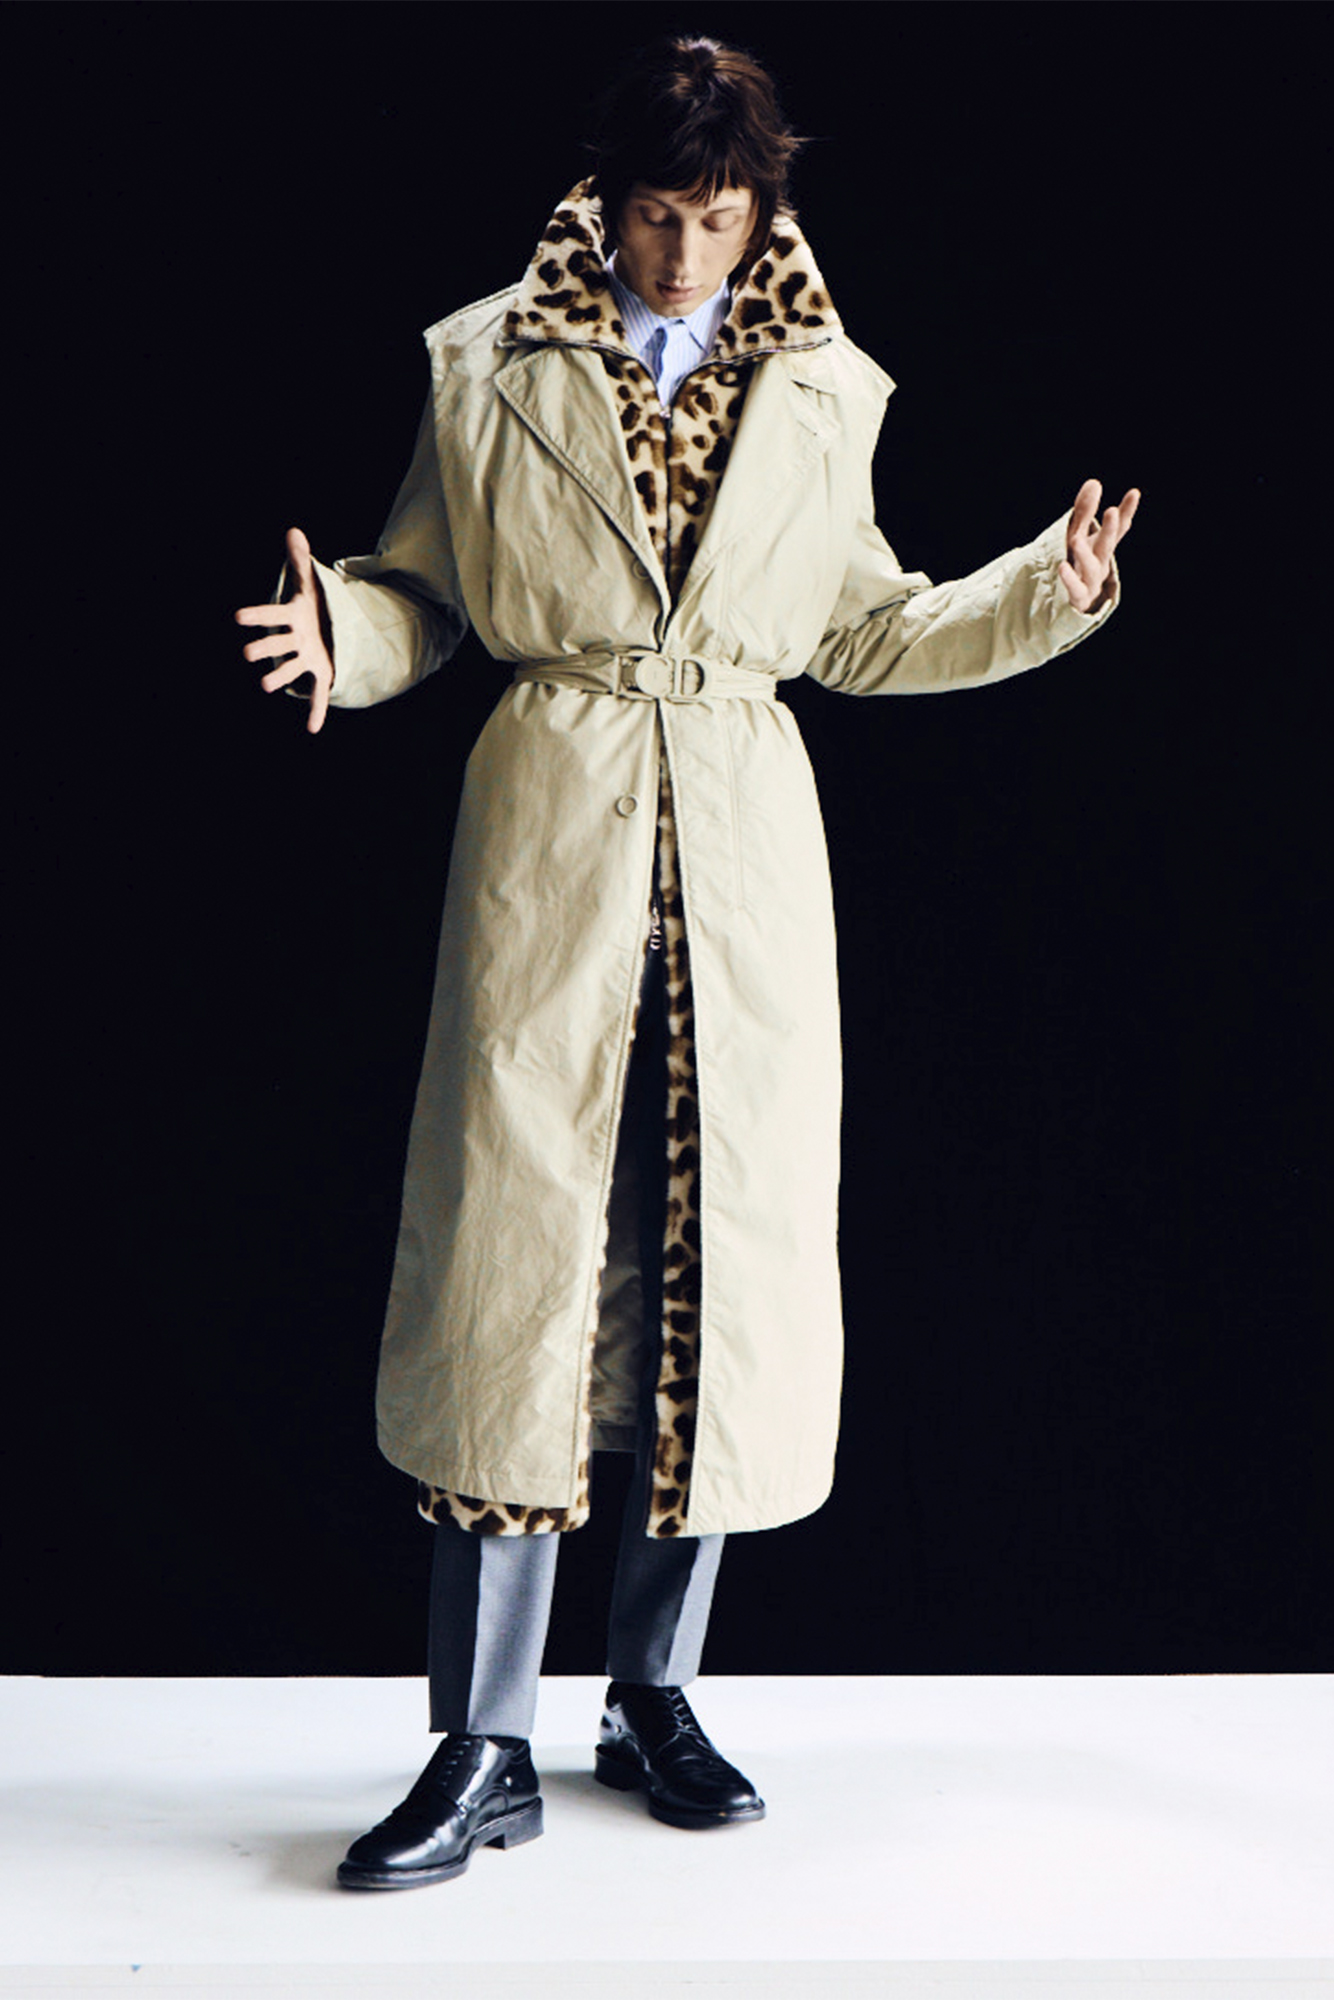 Model for Sharp November in beige trench coat with cheetah print